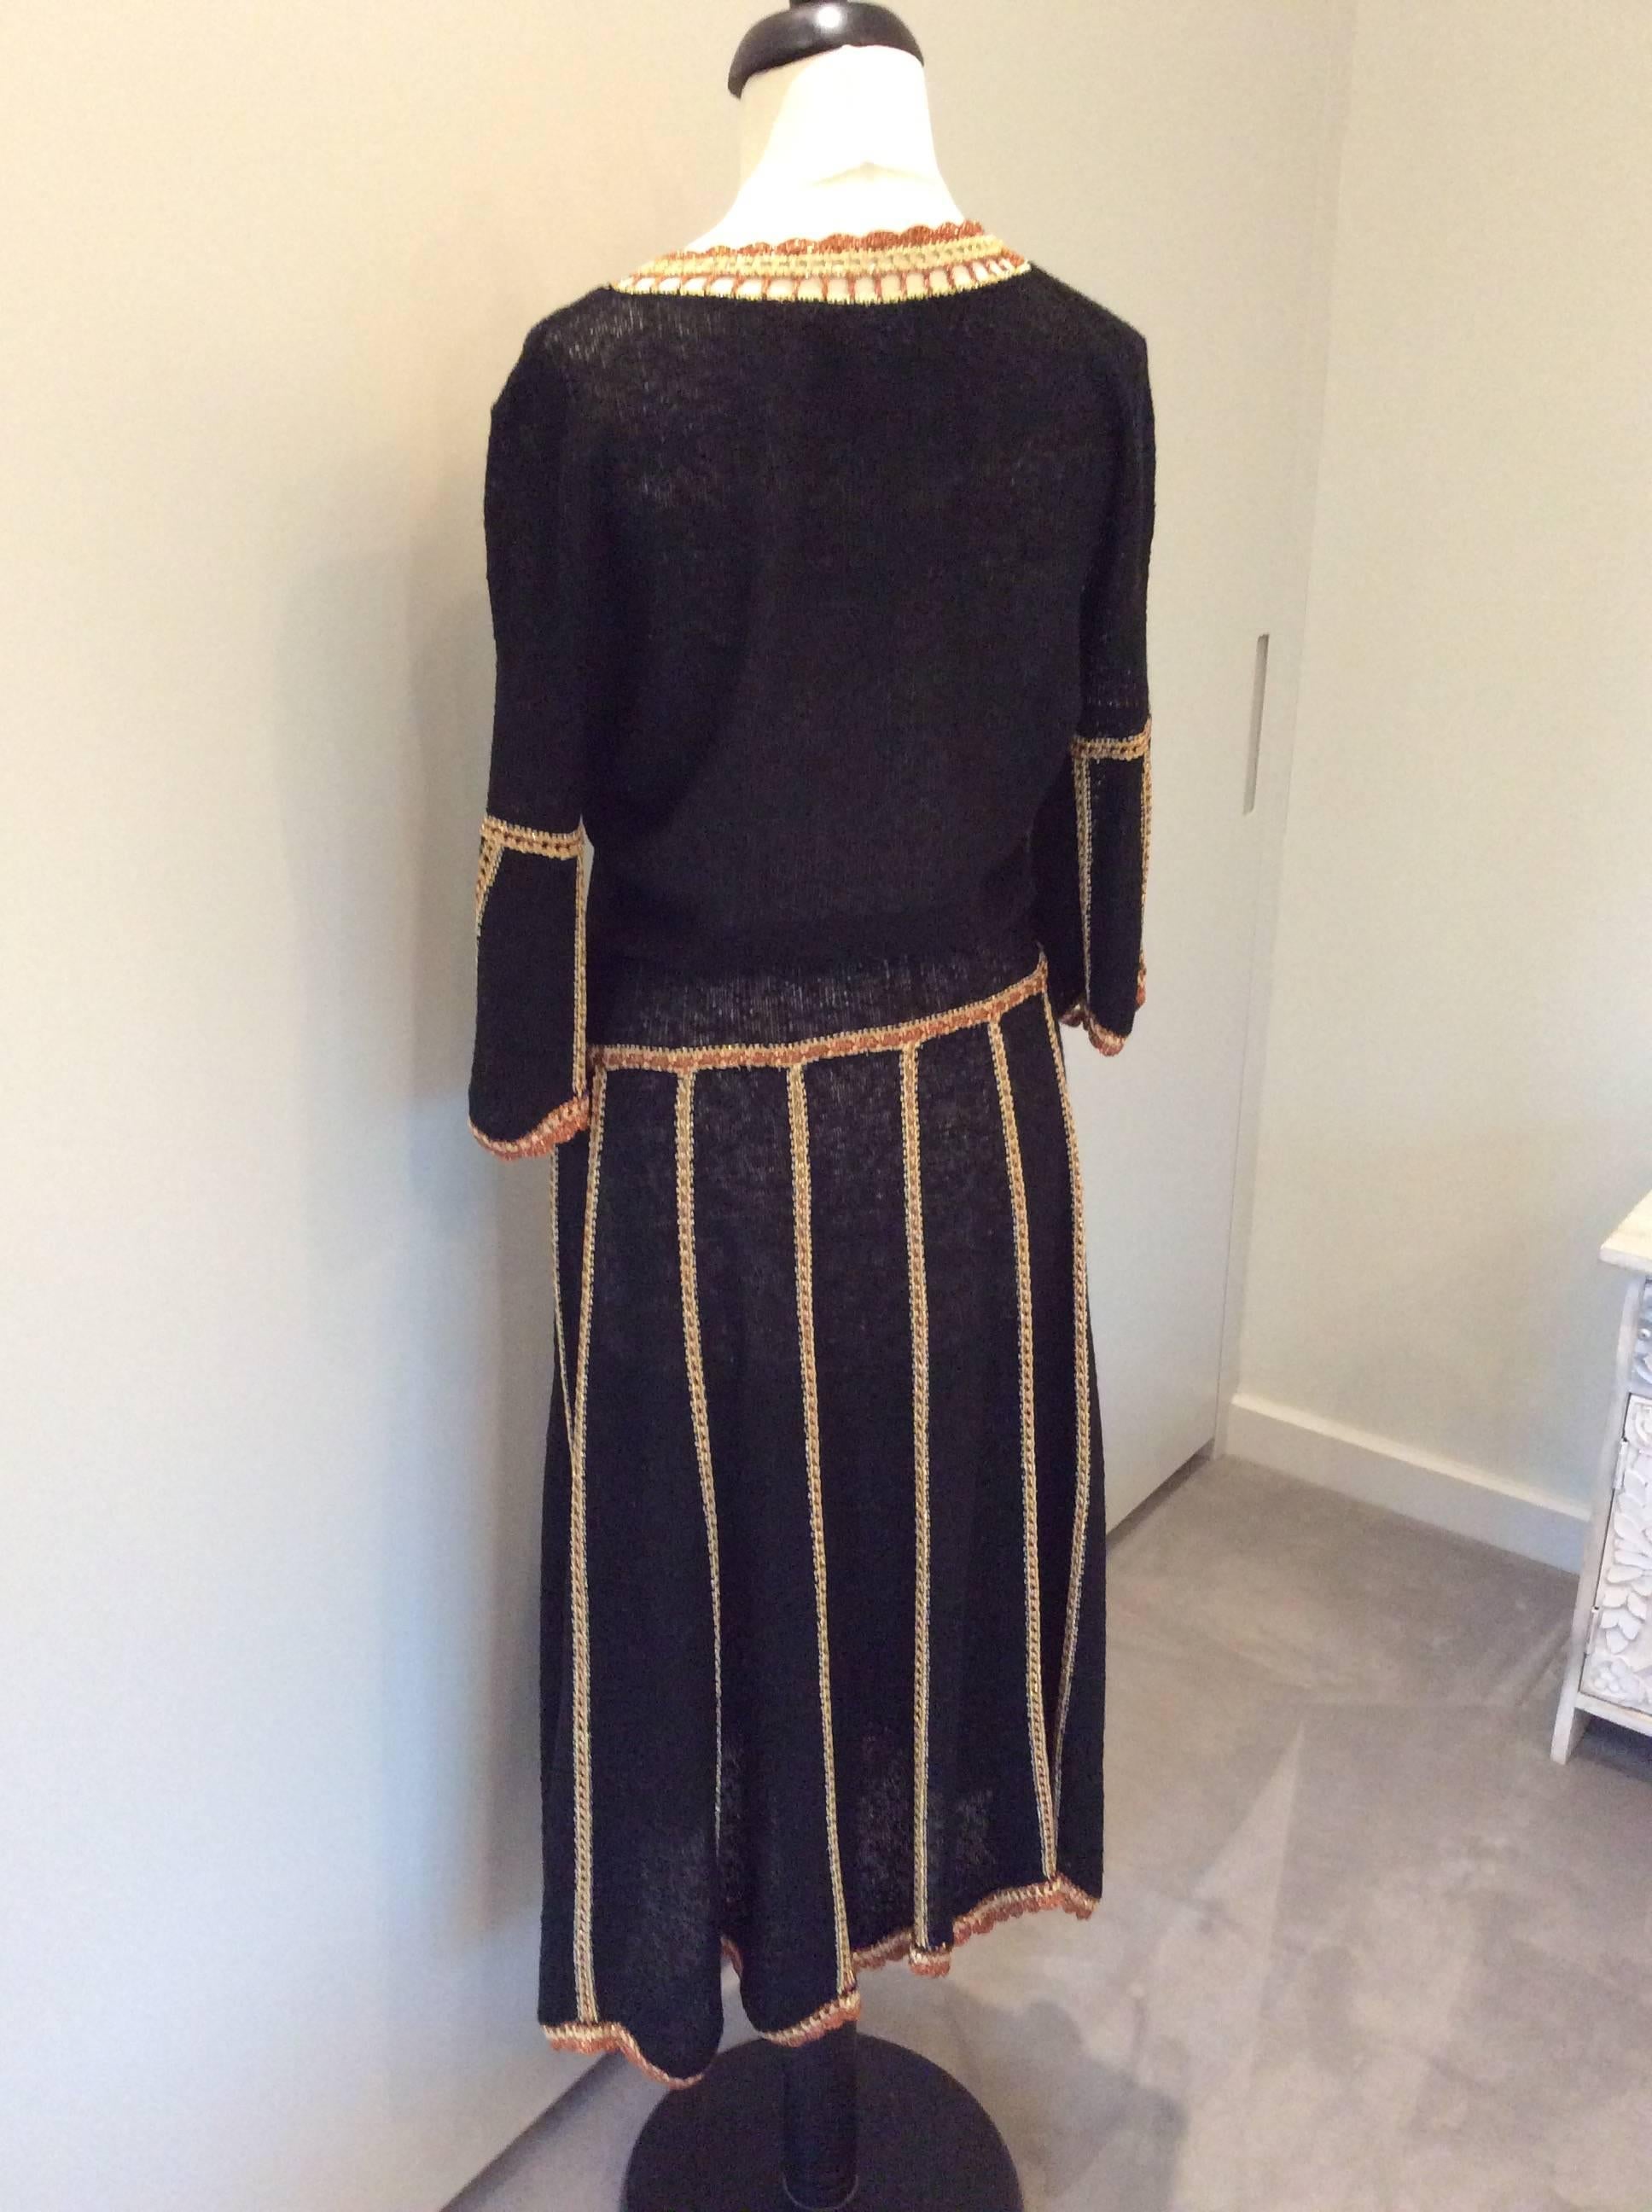  A 1970's Mary Ruane Black knit dress with copper and soft gold coloured metallic thread detail to neckline, bell sleeves, skirt and hemline.  Low, round neckline, 3/4 sleeves, dropped waist with tie belt and gently gored skirt creating scalloped